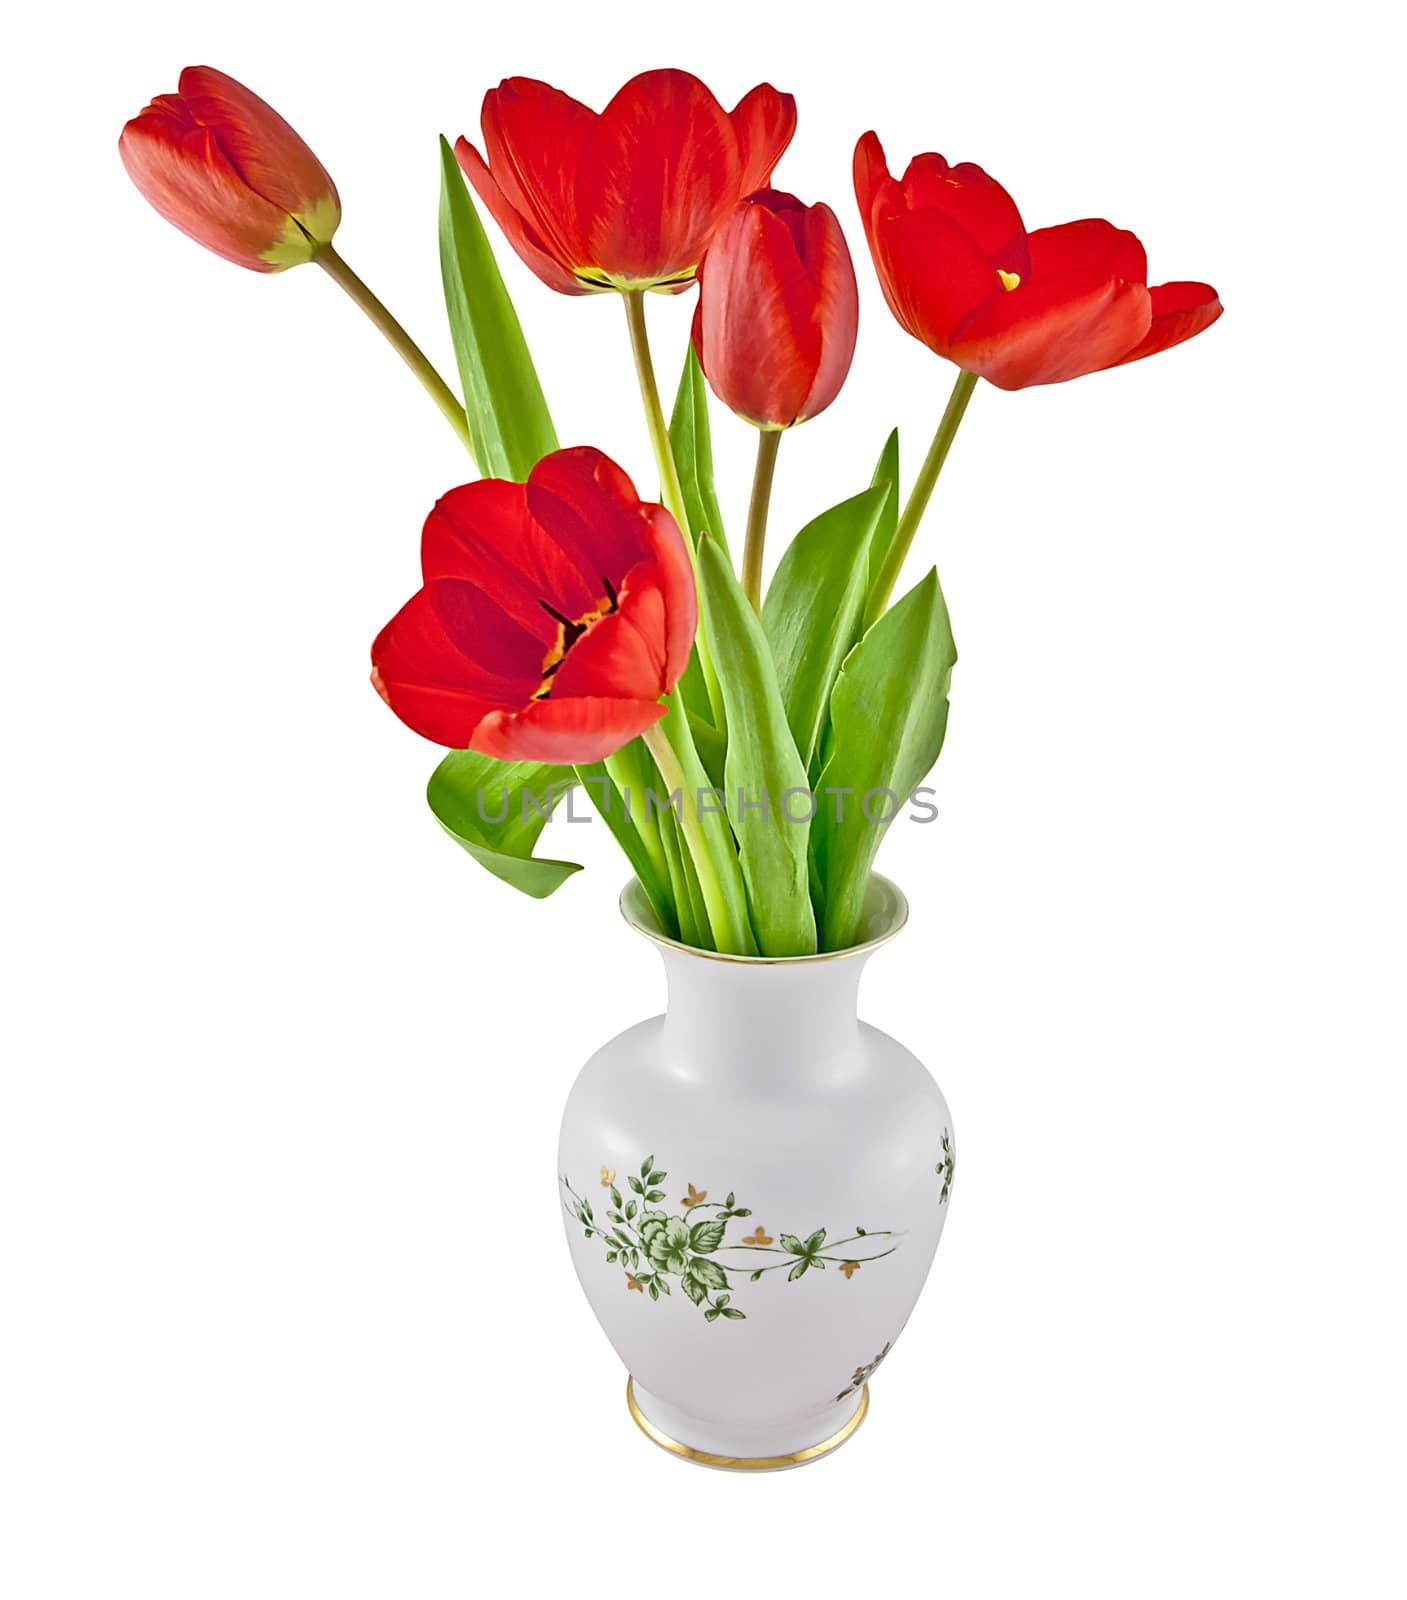 Tulips in a white vase isolated on white